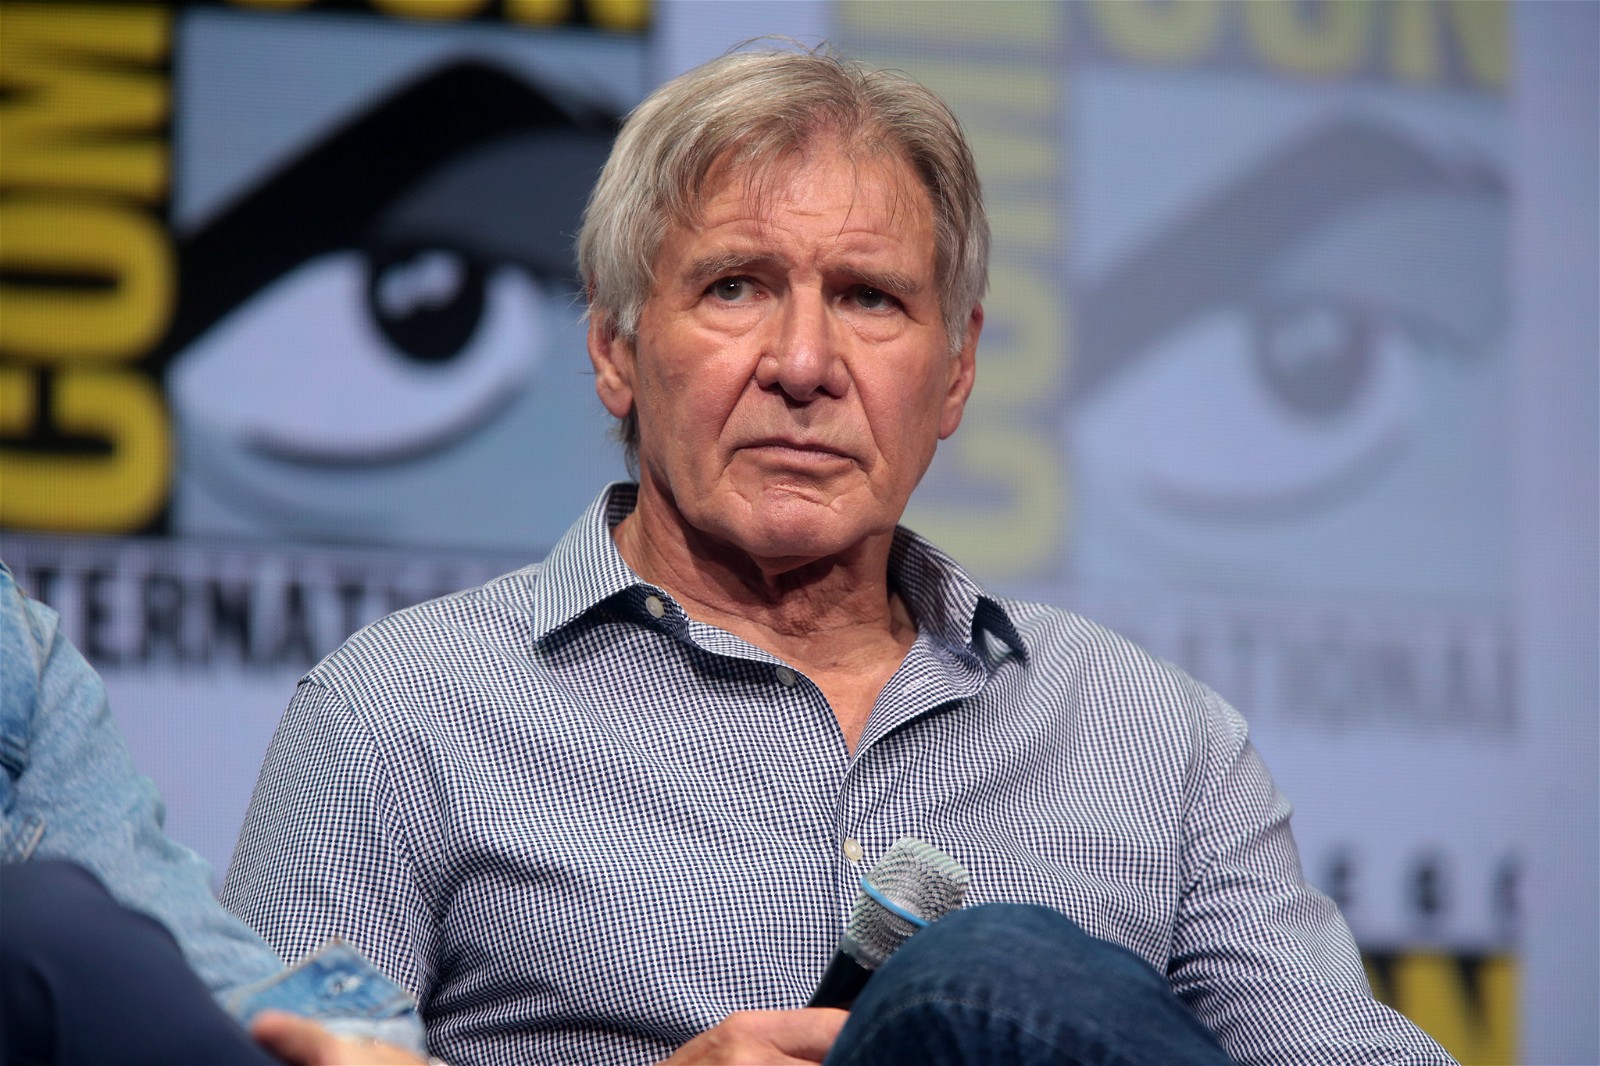 Harrison Ford to play General Ross/Red Hulk in the MCU